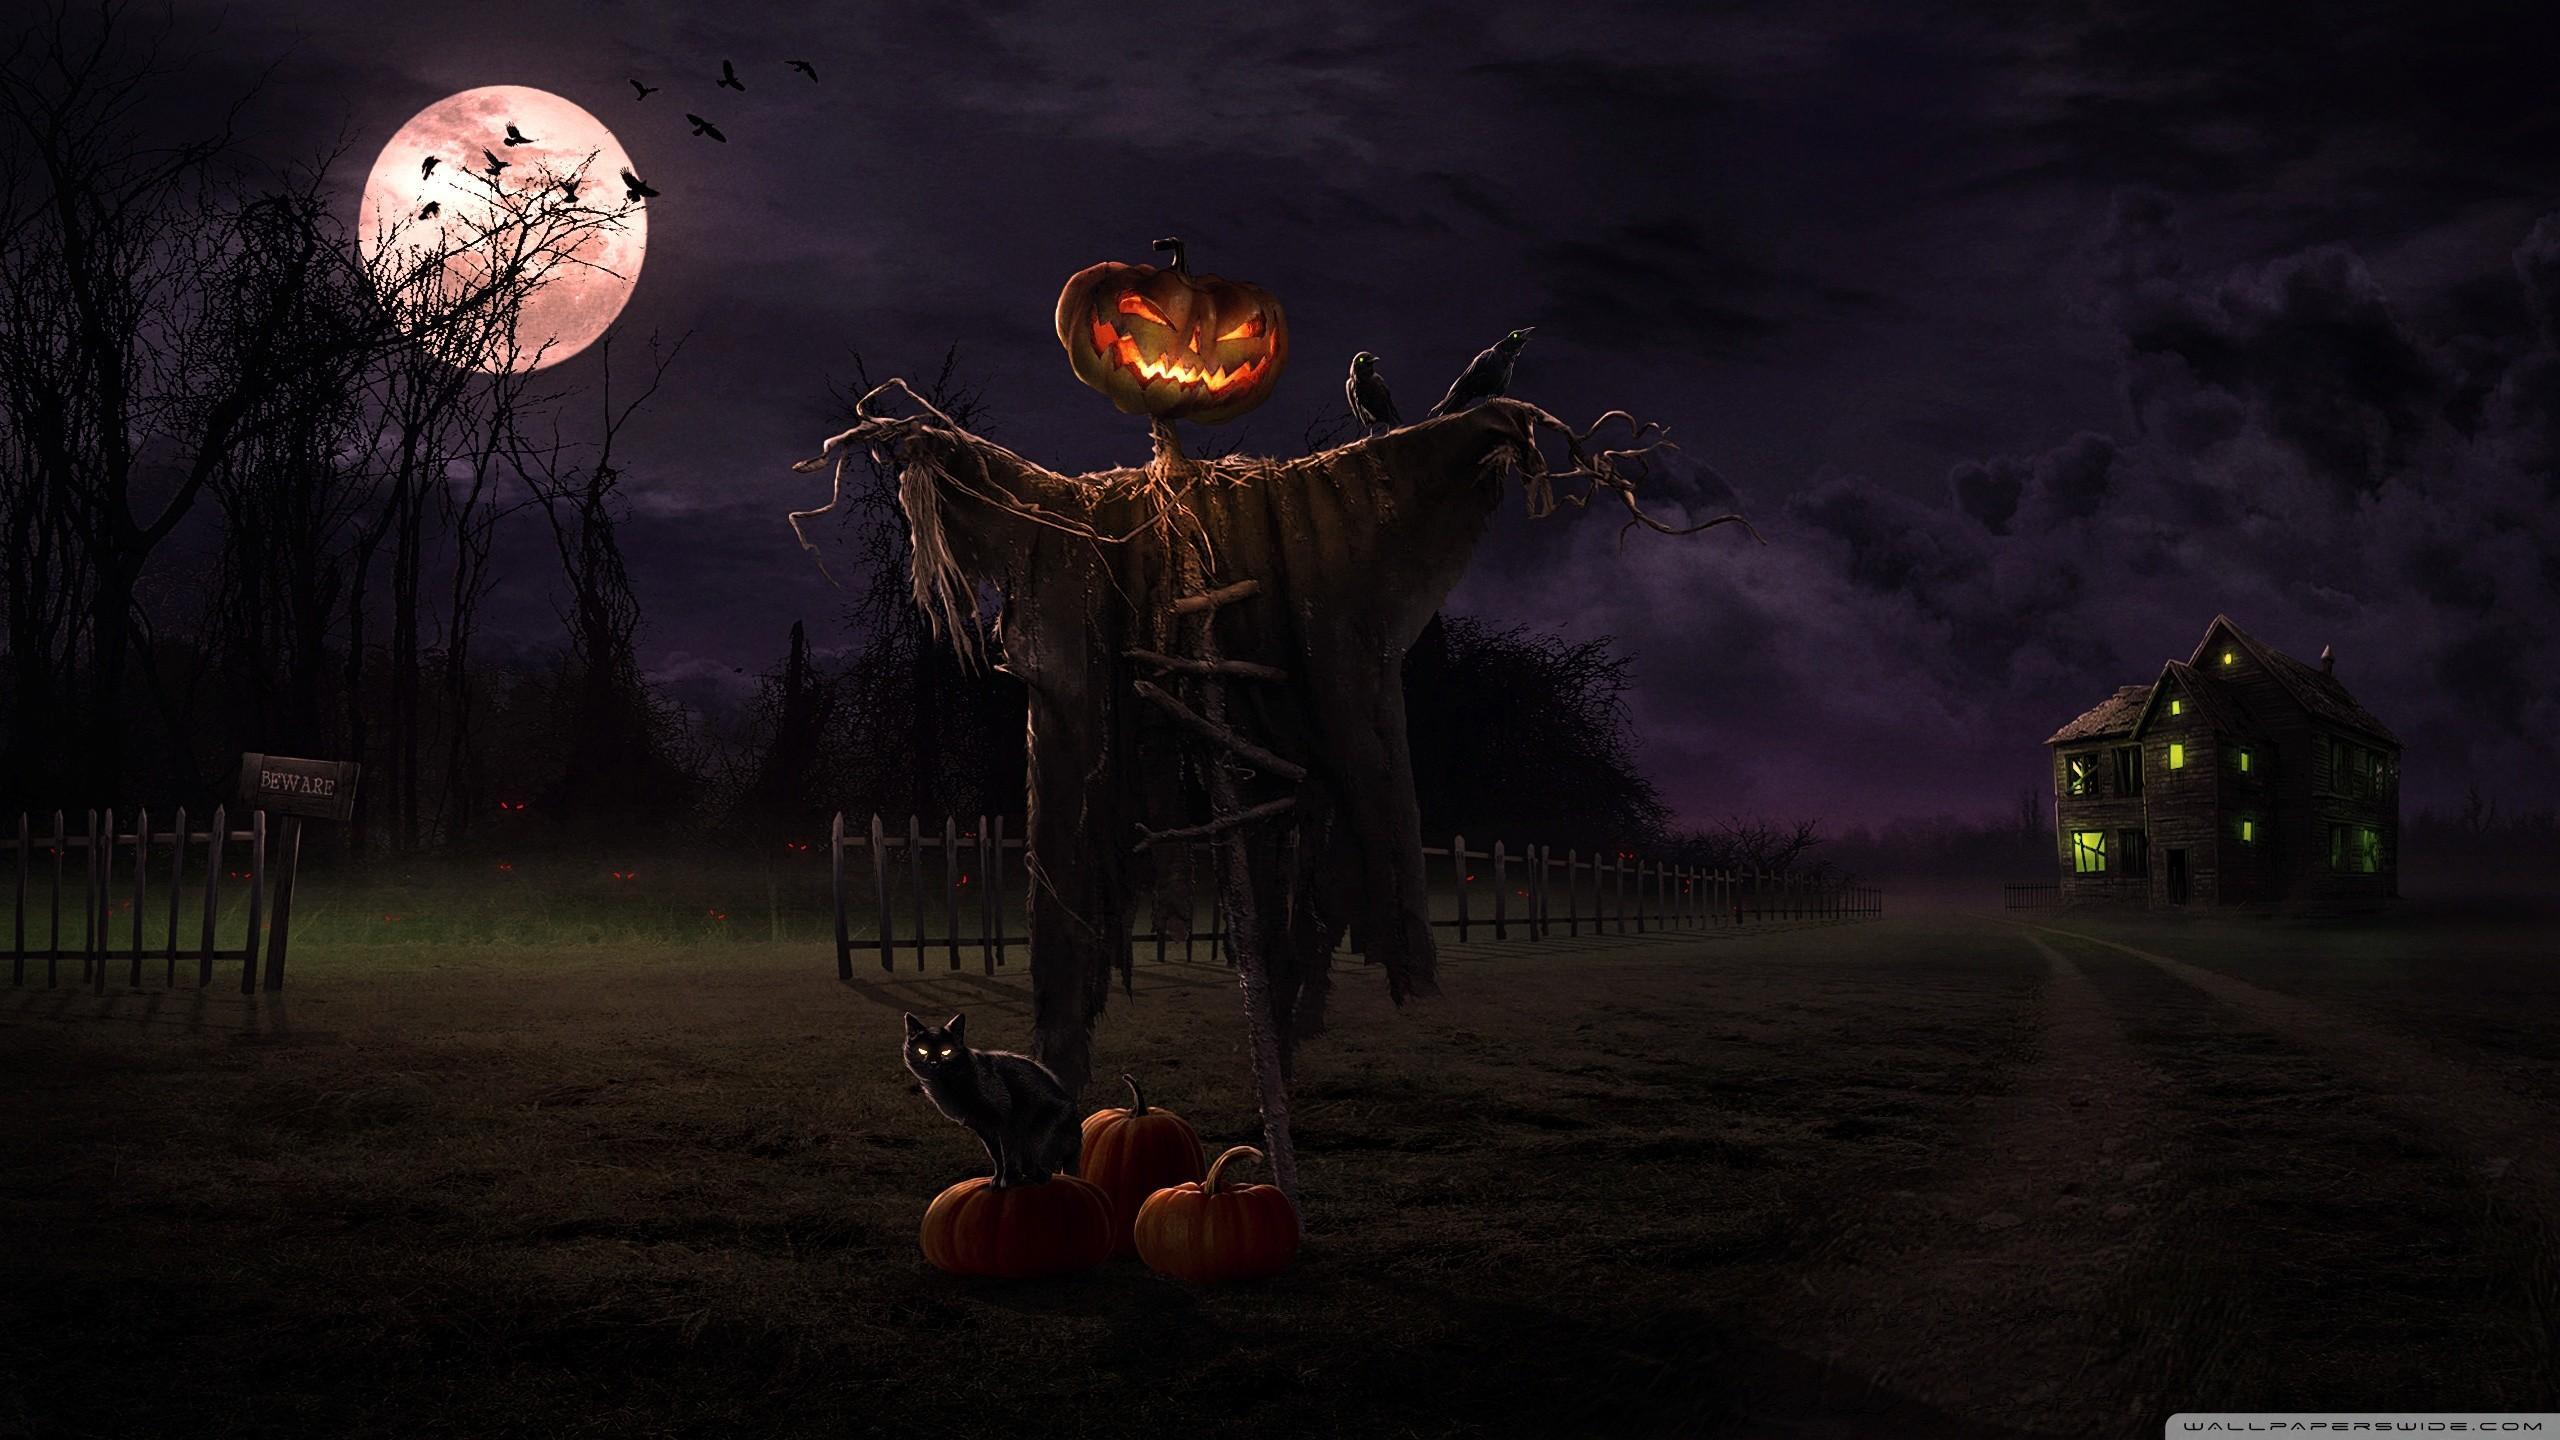 Stunning Halloween Live Wallpaper For Pc image For Free